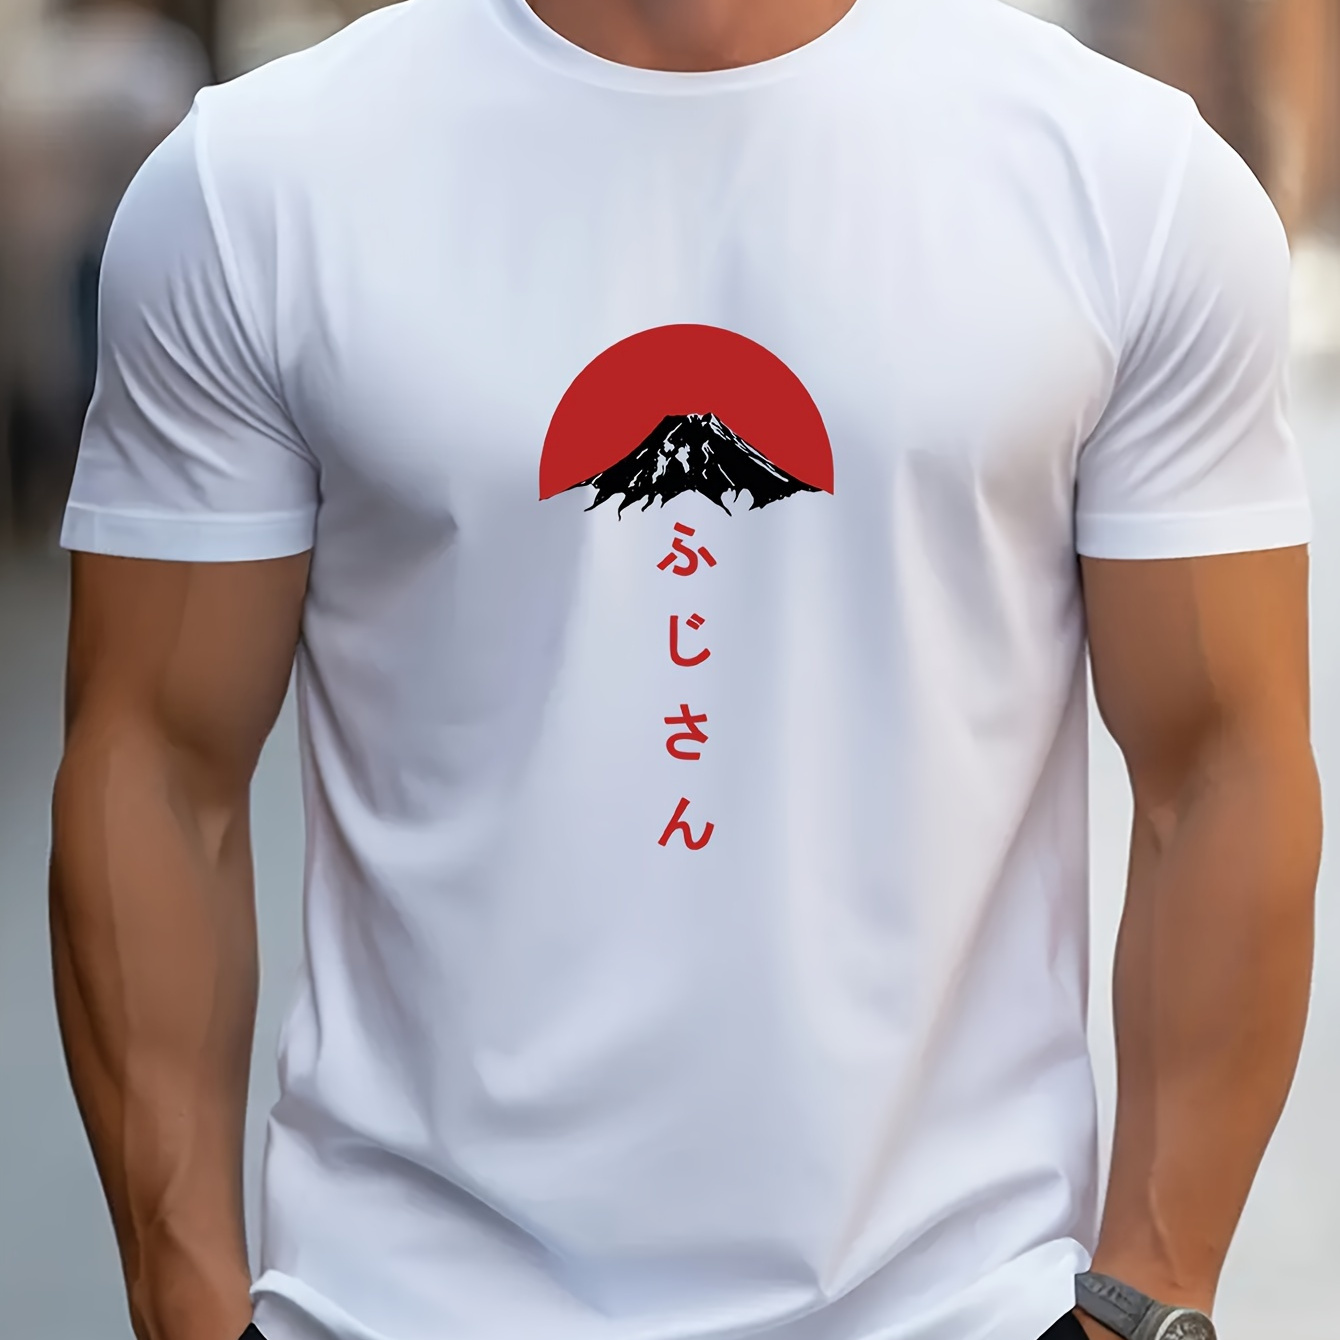 

Japanese Letters Print Men's Casual T-shirt, Short Sleeve Tee Tops, Summer Outdoor Sports Clothing